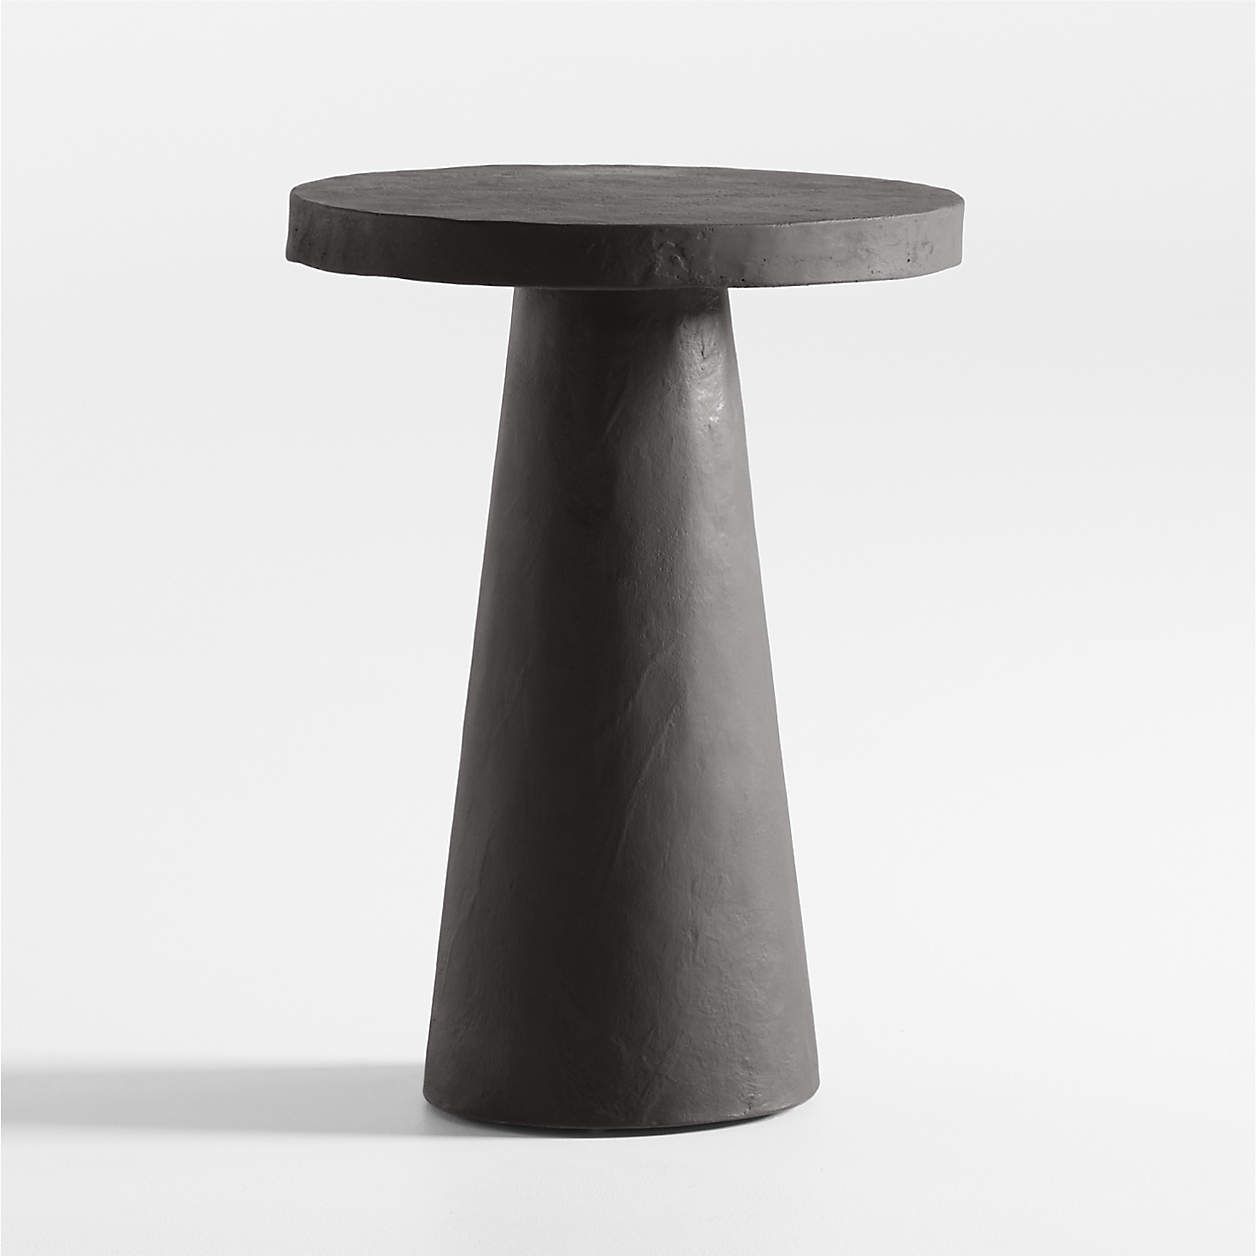 Willy White Plaster Round Pedestal Side Table by Leanne Ford + Reviews | Crate & Barrel | Crate & Barrel